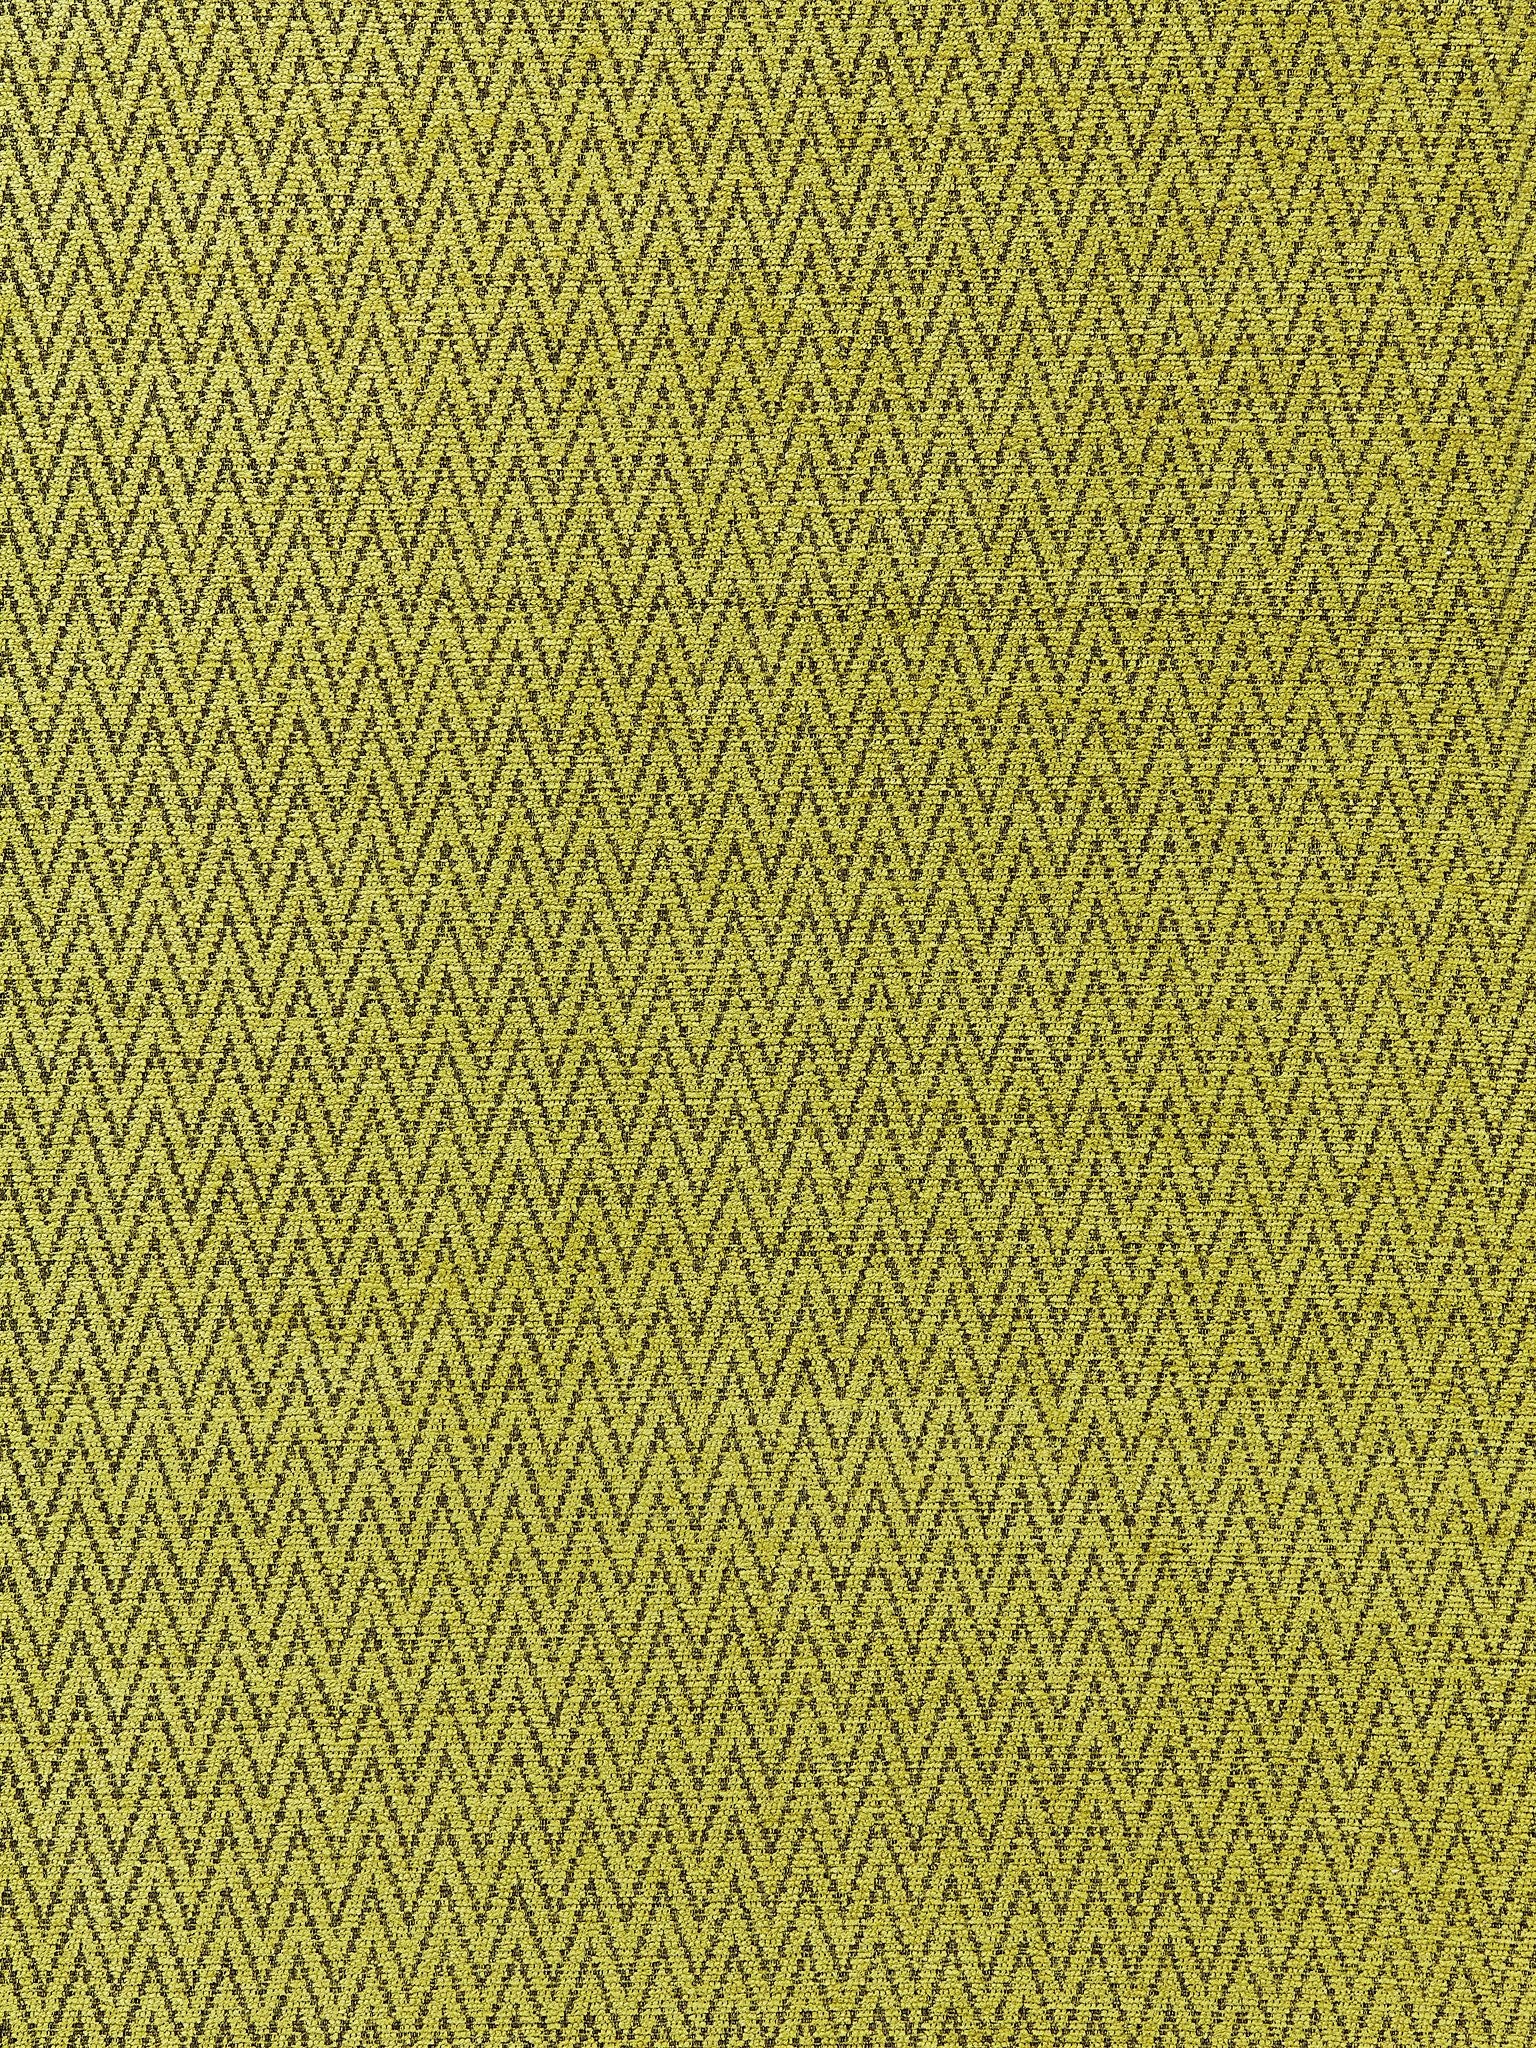 Chevron Chenille fabric in chartreuse color - pattern number BK 0003K65116 - by Scalamandre in the Old World Weavers collection